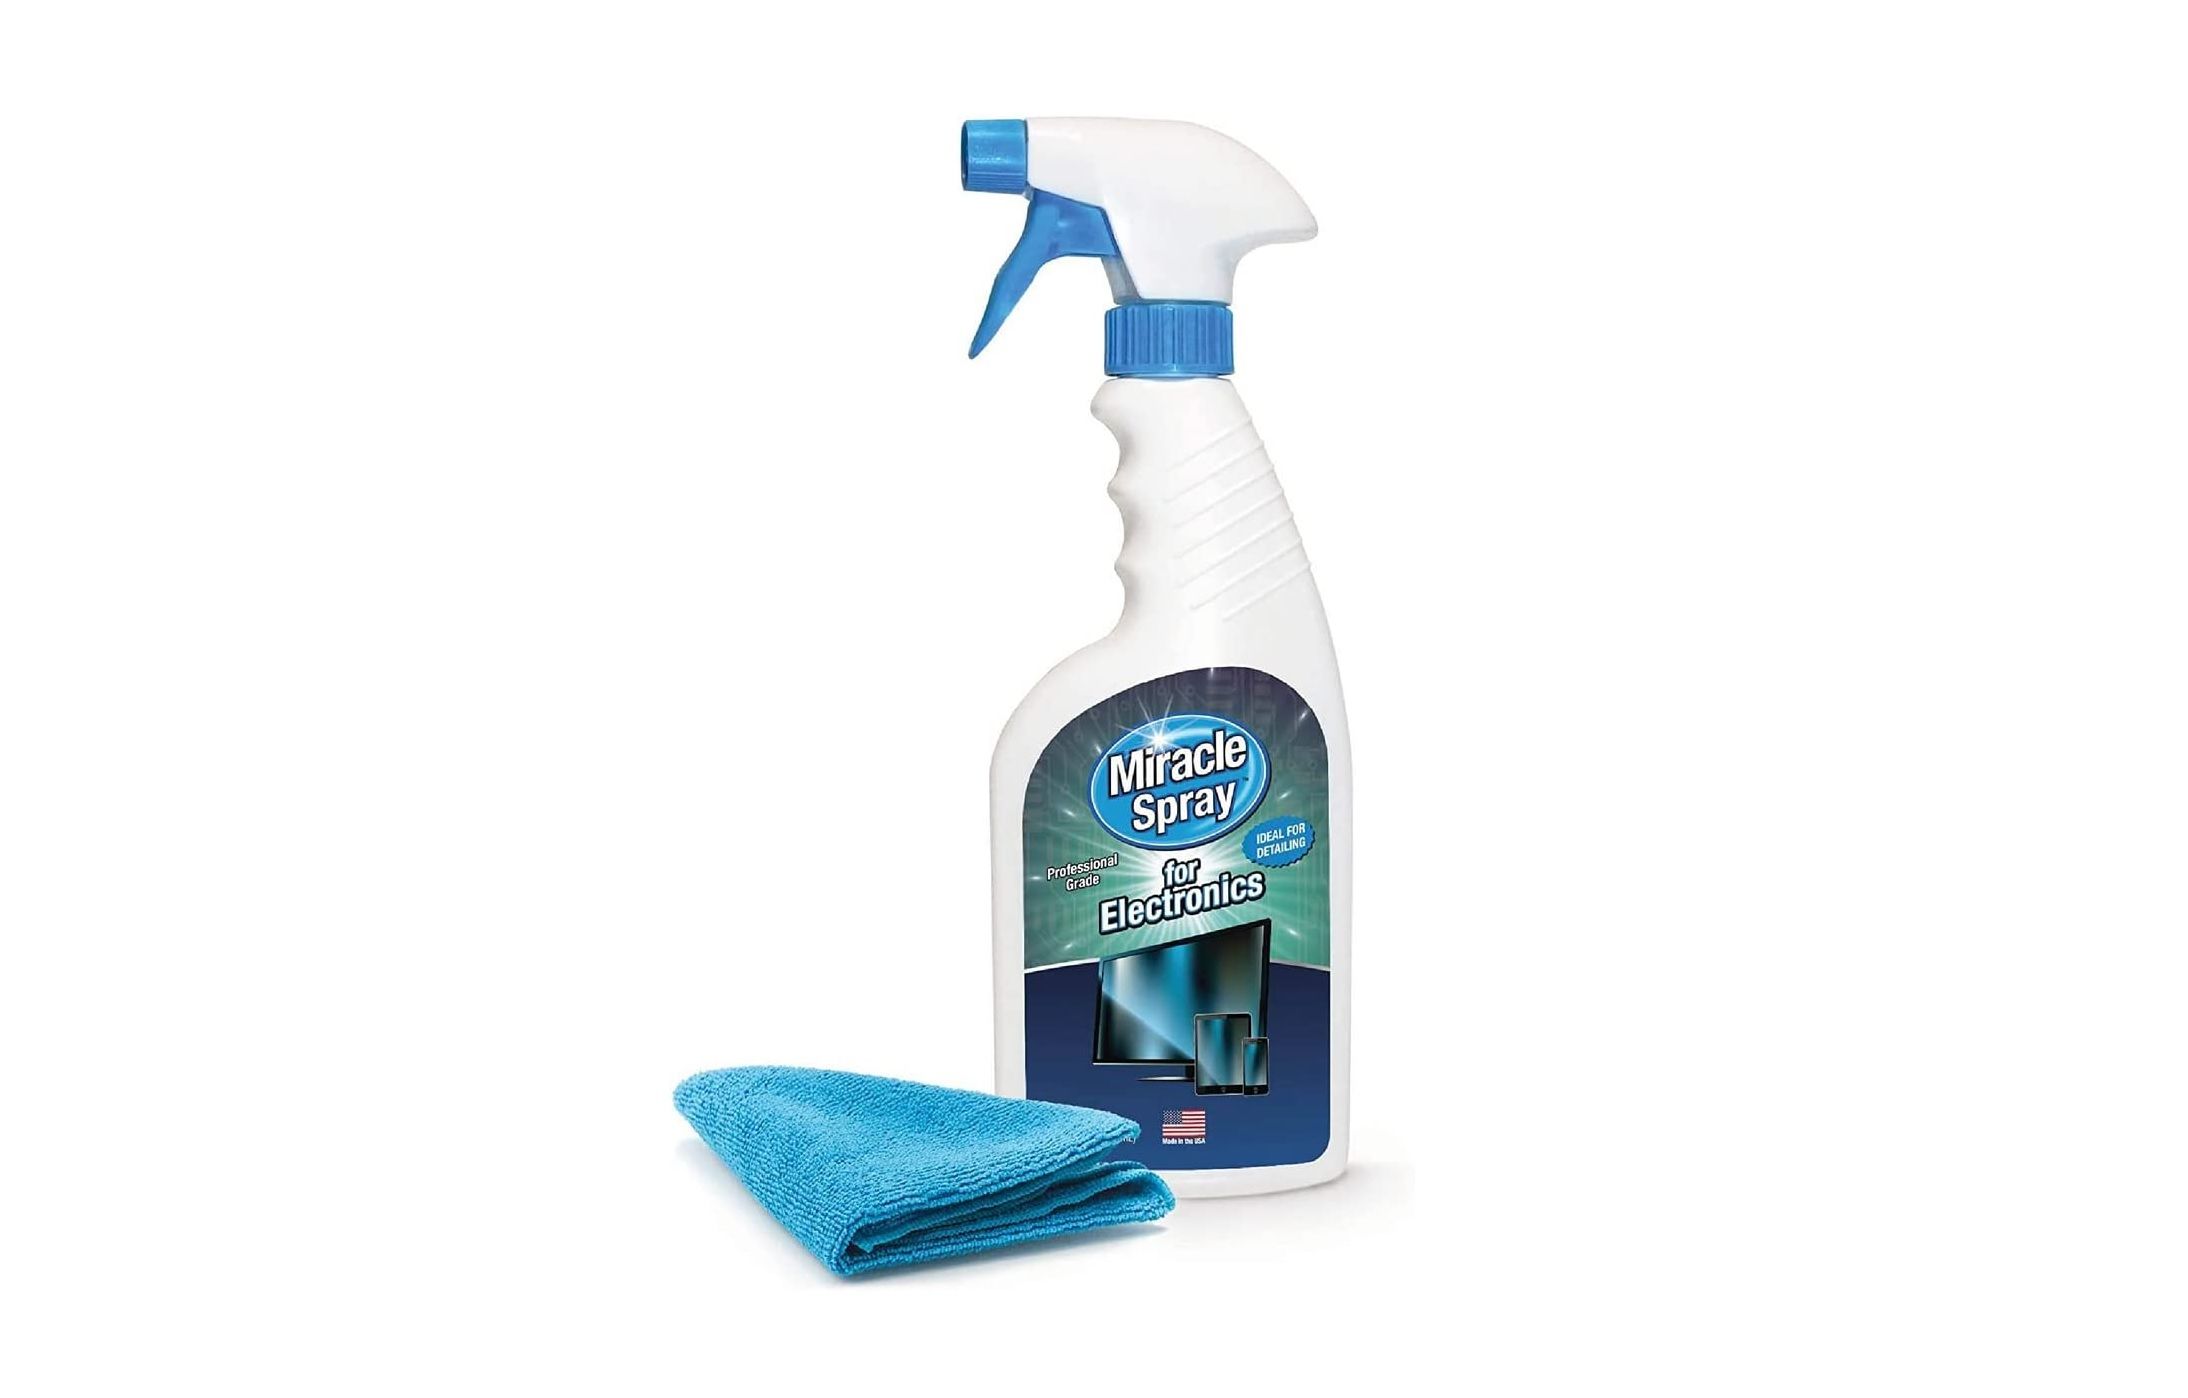 miraclespray cleaner accompanied by microfiber cloth